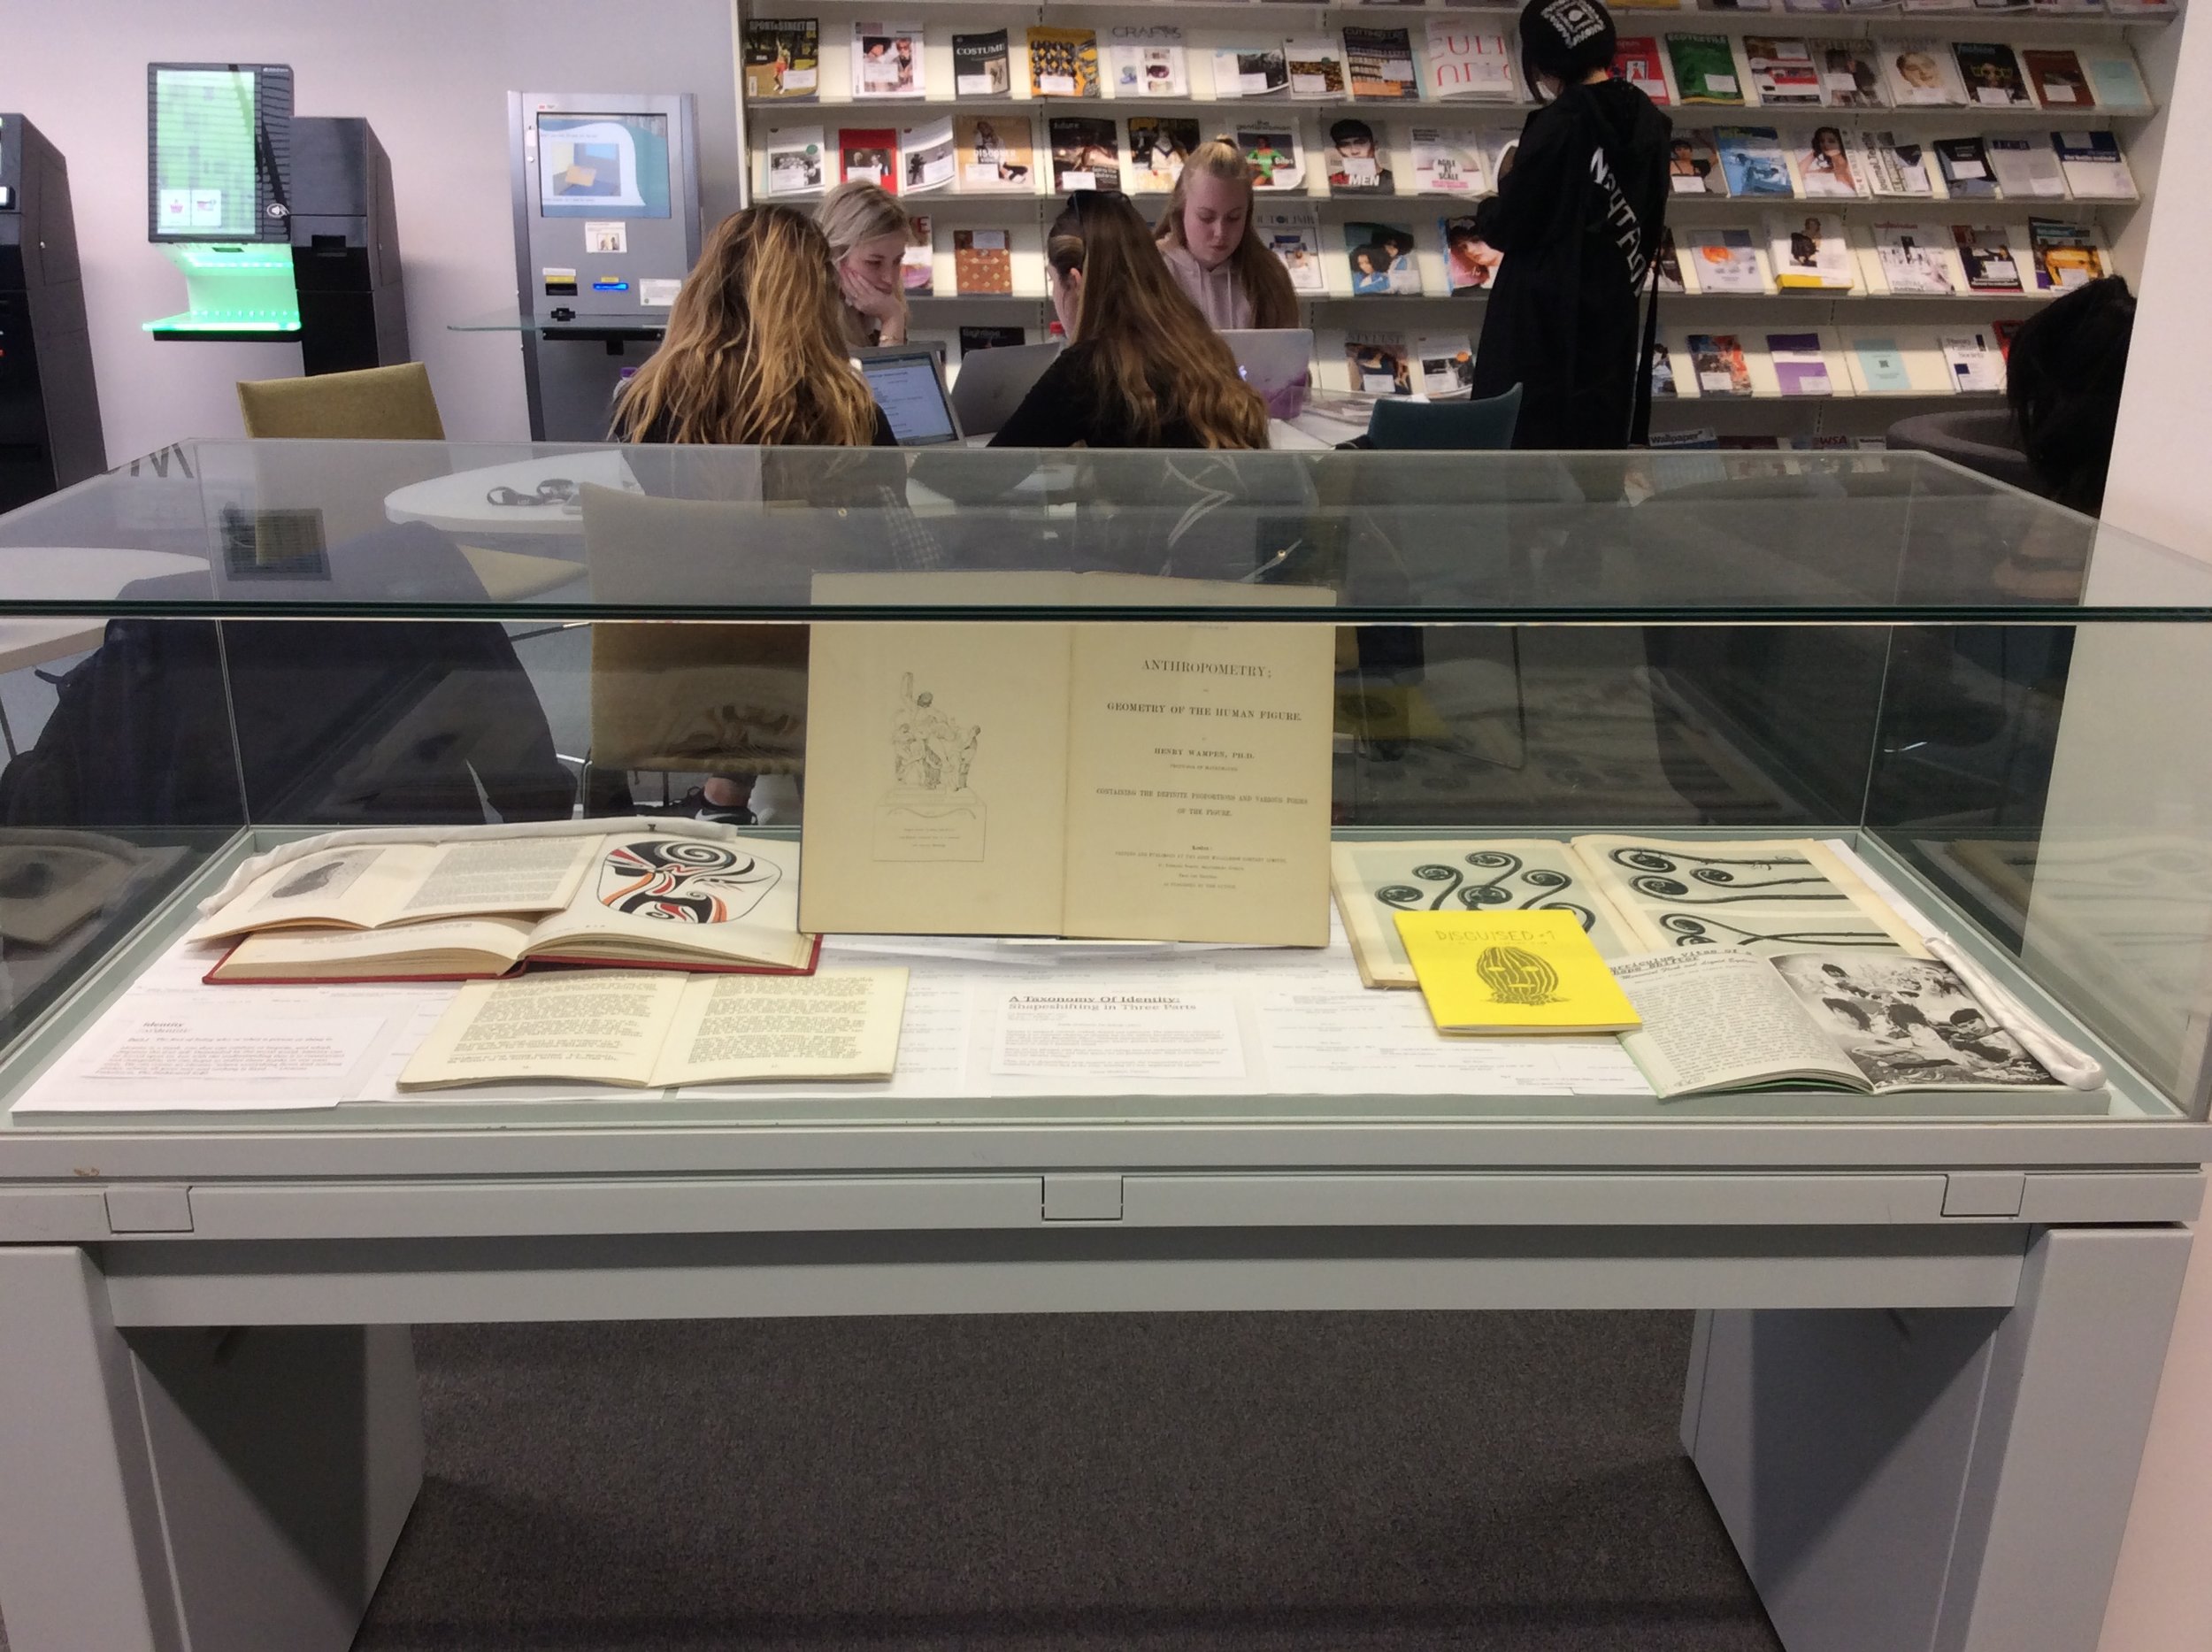    A Taxonomy Of Identity: Shapeshifting in Three Parts  , an exhibition of rare materials from London College of Fashion Library’s Special Collections curated by Cyana Madsen (May - June 2018) 